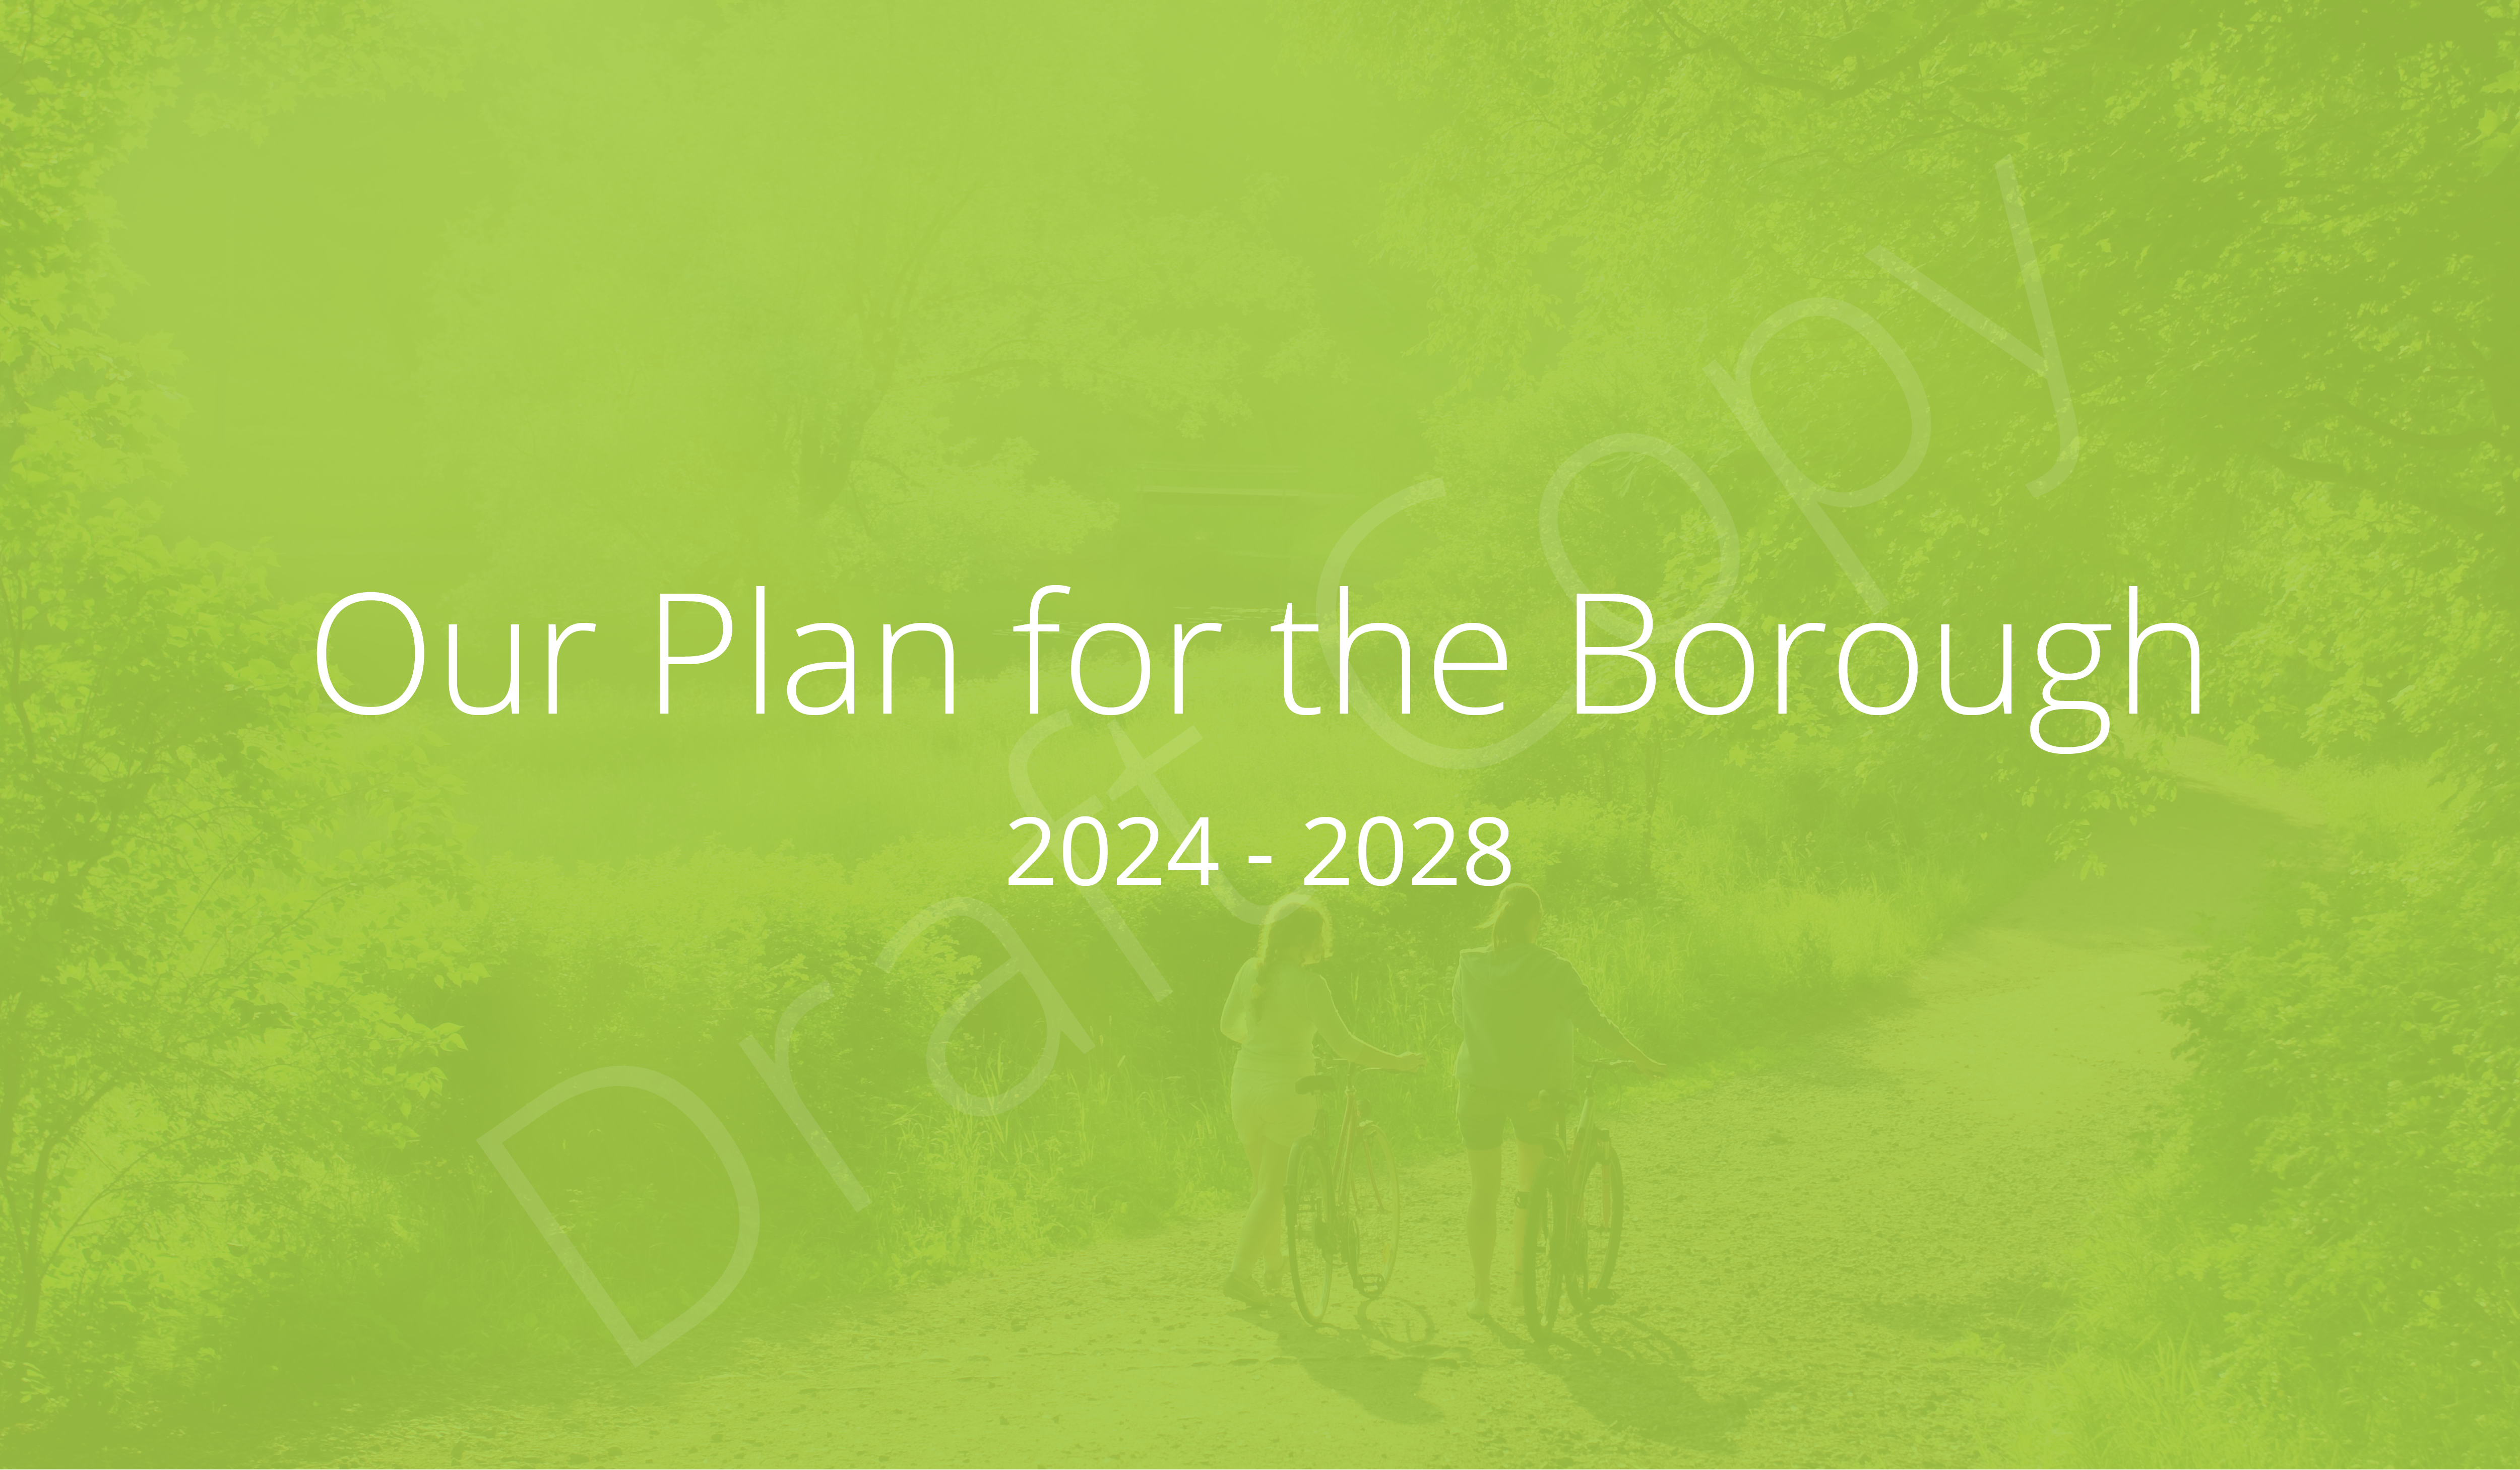 Graphic for the Borough Plan with text that reads: Our Plan for the Borough 2024-2028 tile